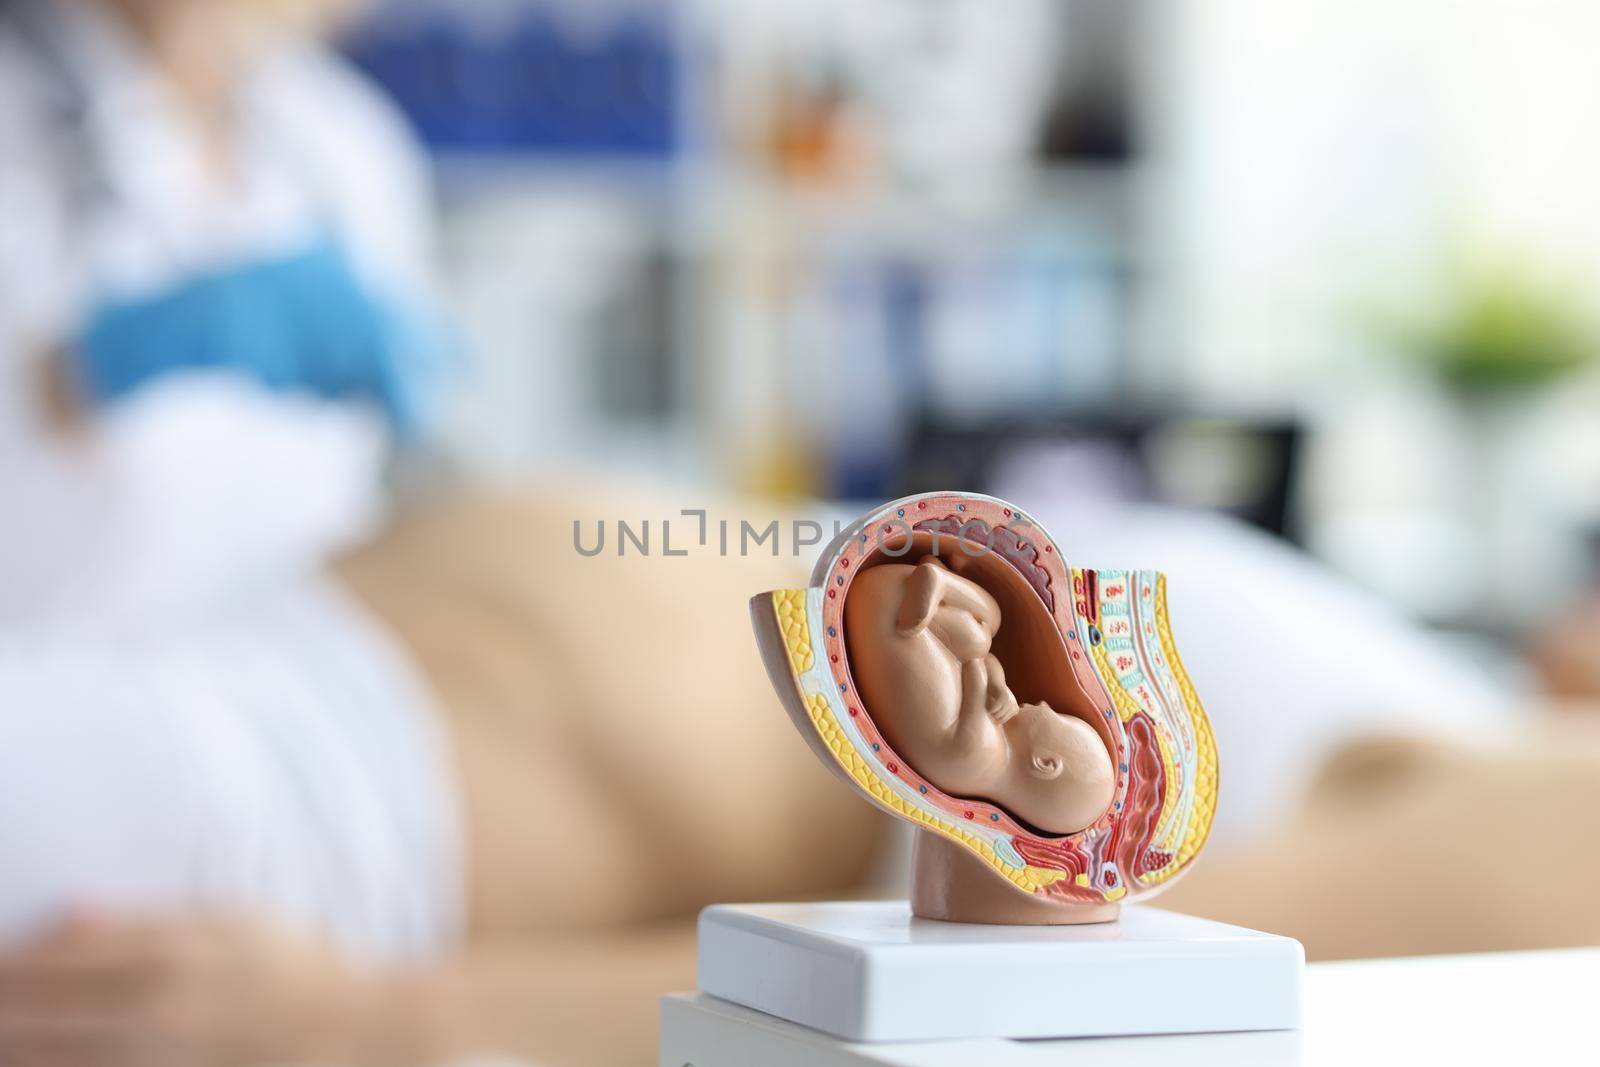 Ultrasound test and ultrasound of baby fetus during pregnancy by kuprevich